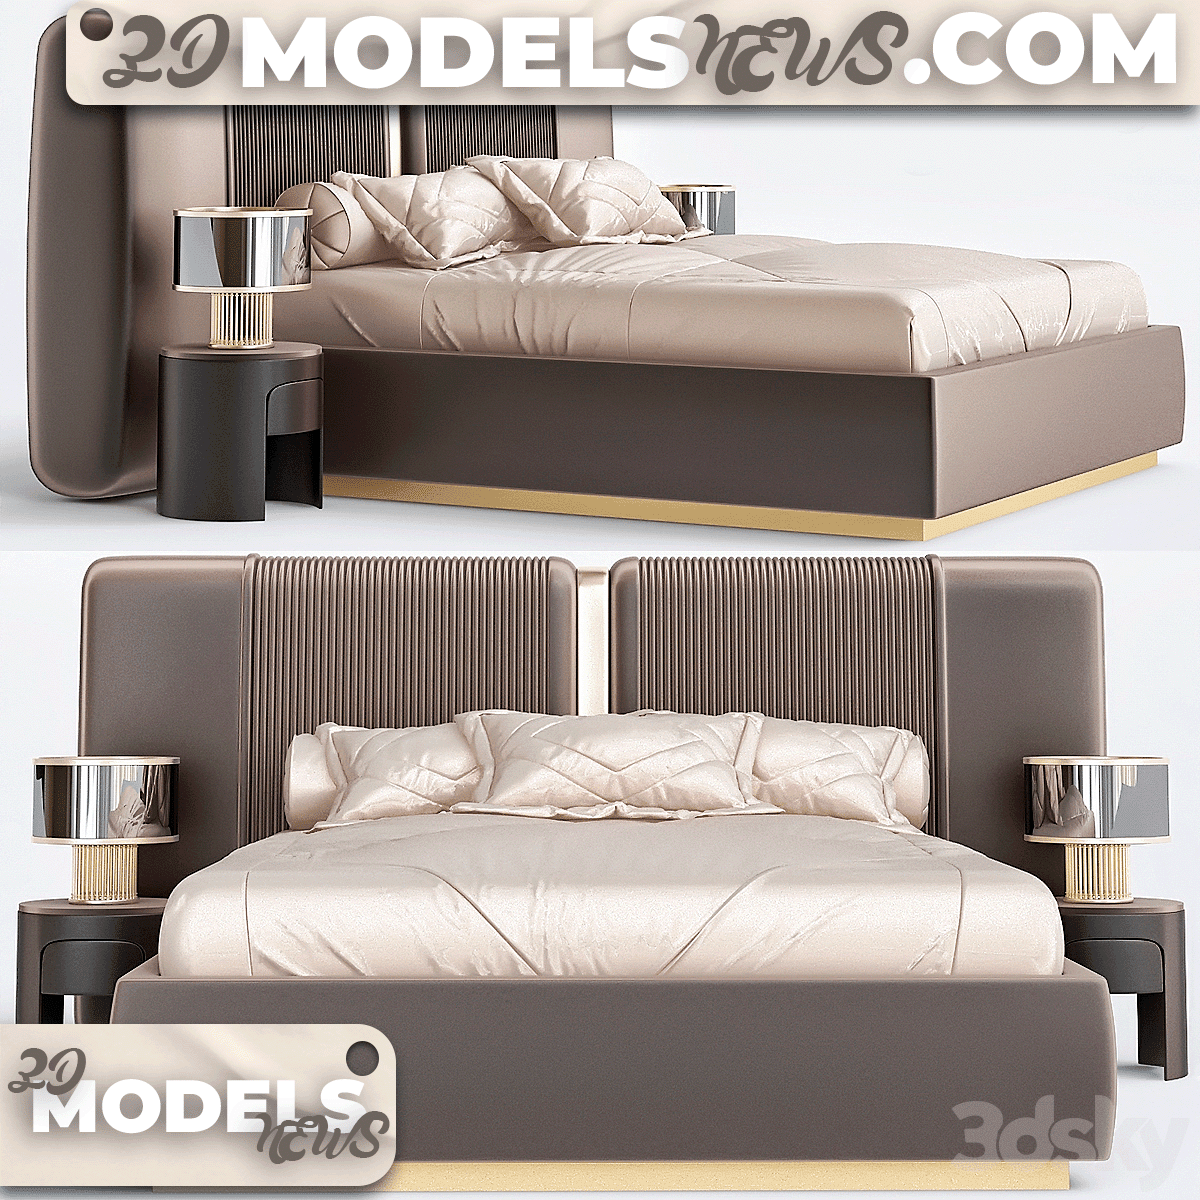 Rugiano Bed Model 1